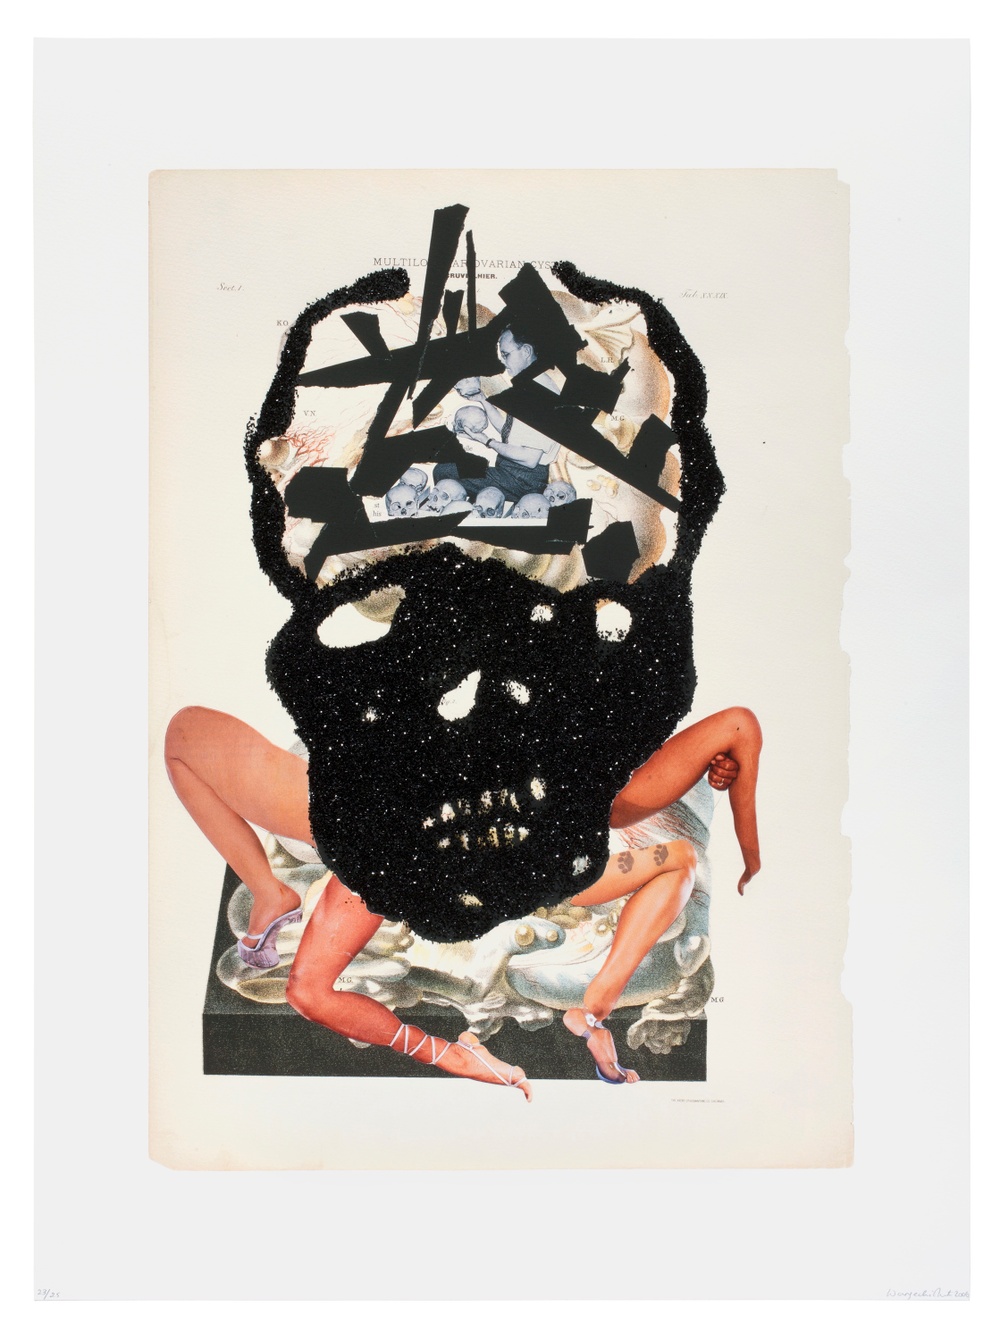 Collaged image of women’s legs cut out from a magazine over a copy of a medical drawing with a big scull over the top made from black glitter.